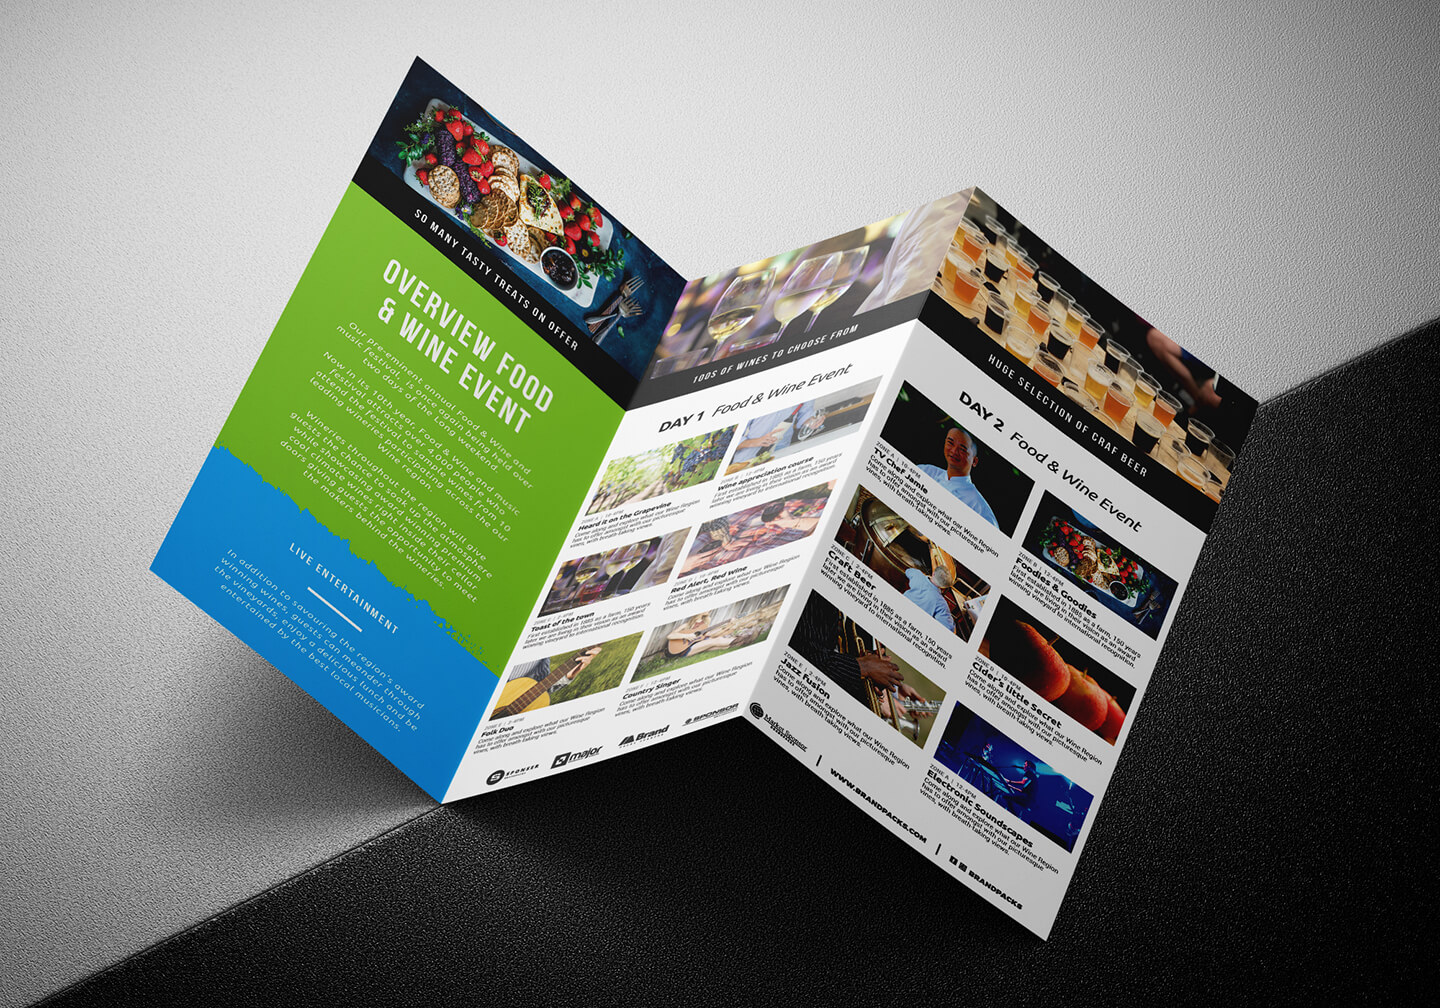 Free Tri Fold Brochure Template For Events & Festivals – Psd Throughout Illustrator Brochure Templates Free Download